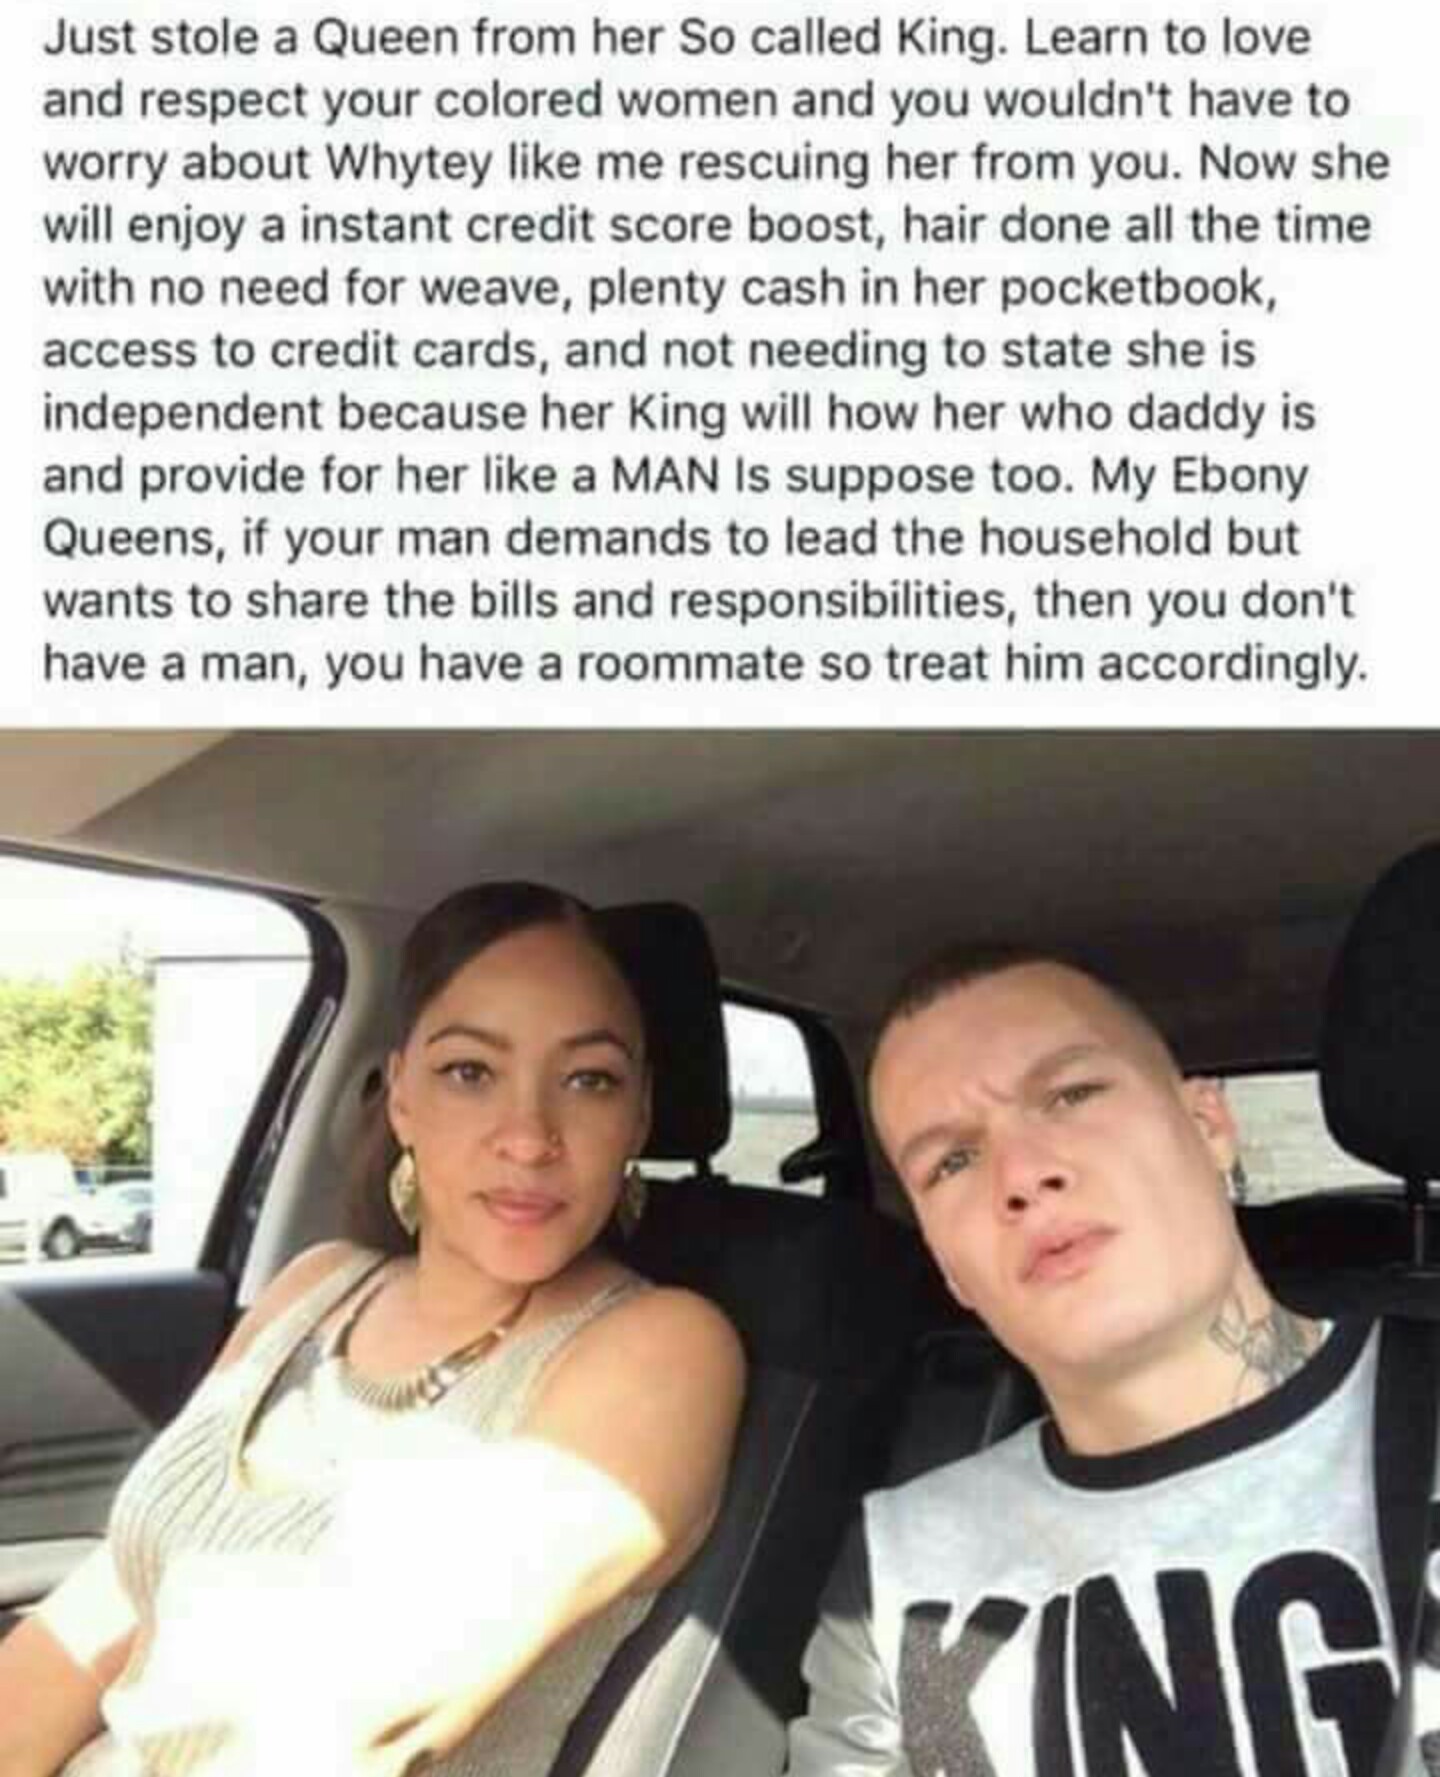 photo caption - Just stole a Queen from her so called King. Learn to love and respect your colored women and you wouldn't have to worry about Whytey me rescuing her from you. Now she will enjoy a instant credit score boost, hair done all the time with no 